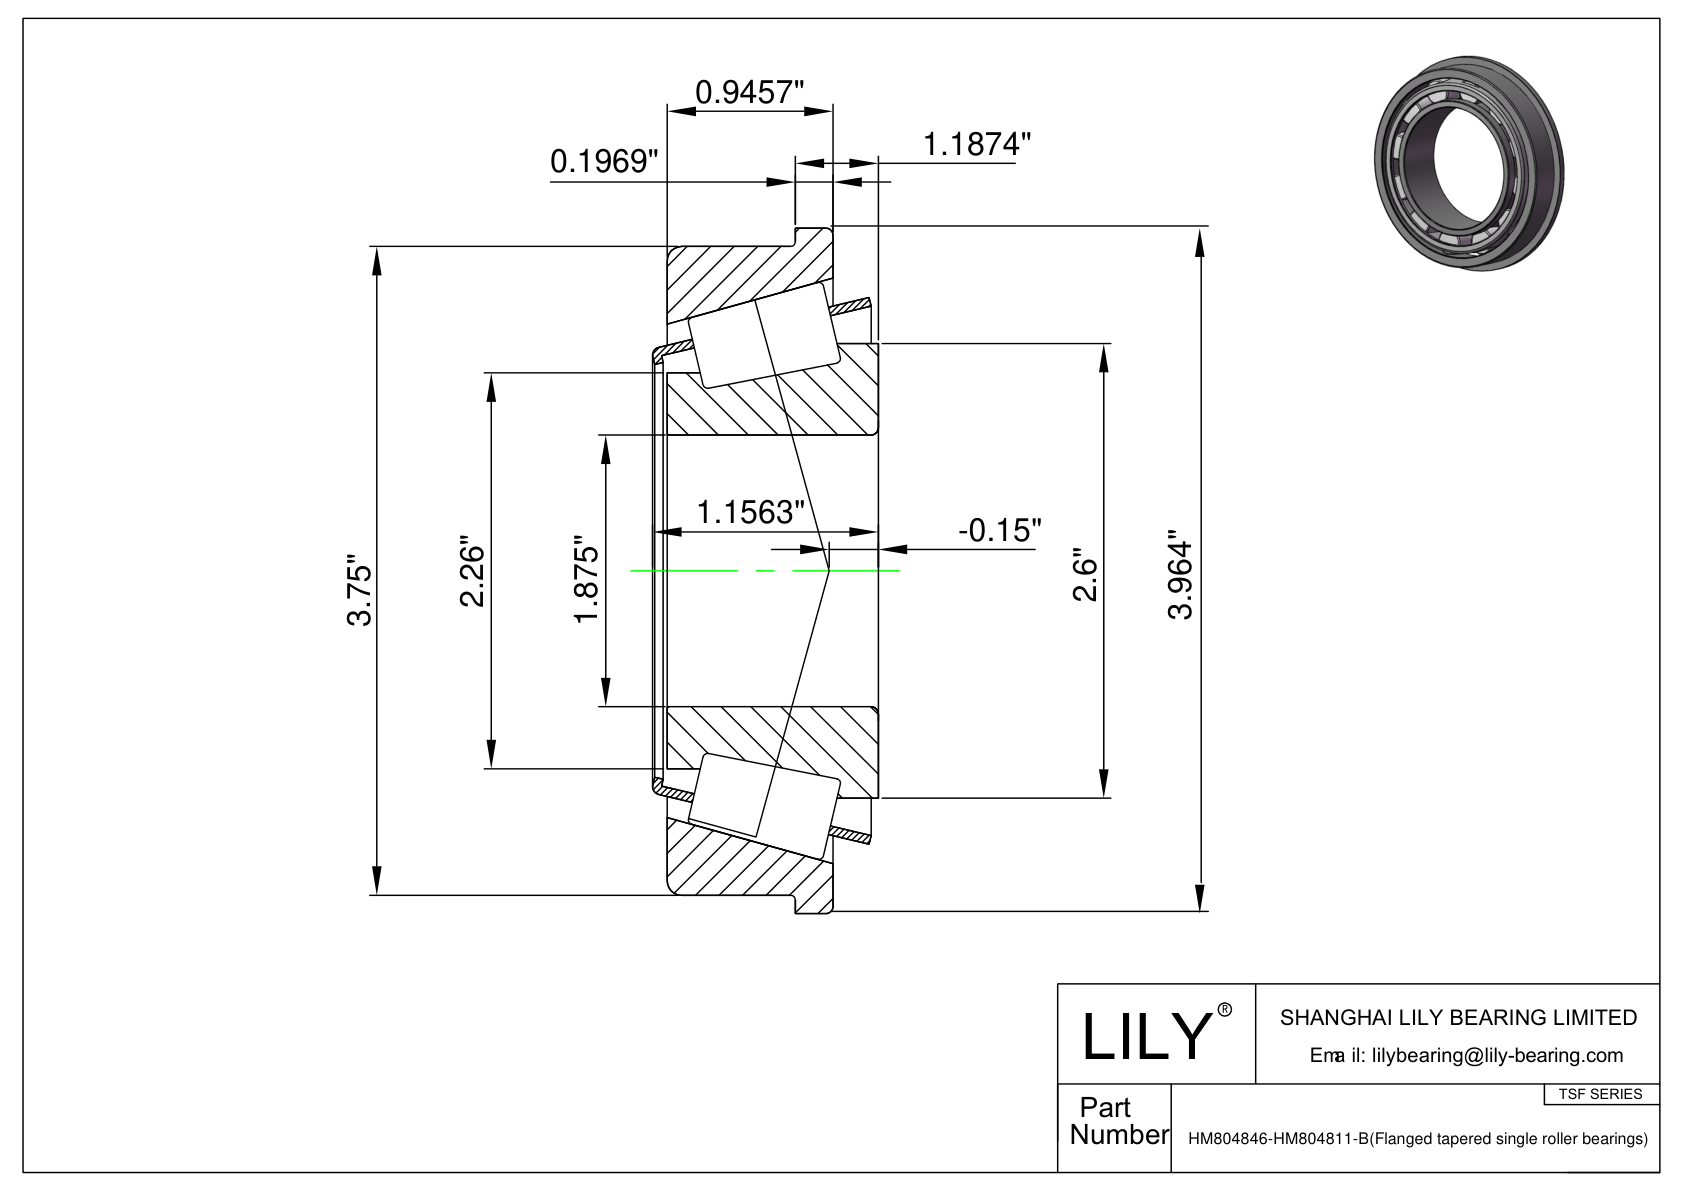 HM804846-HM804811-B TSF (Tapered Single Roller Bearings with Flange) (Imperial) cad drawing